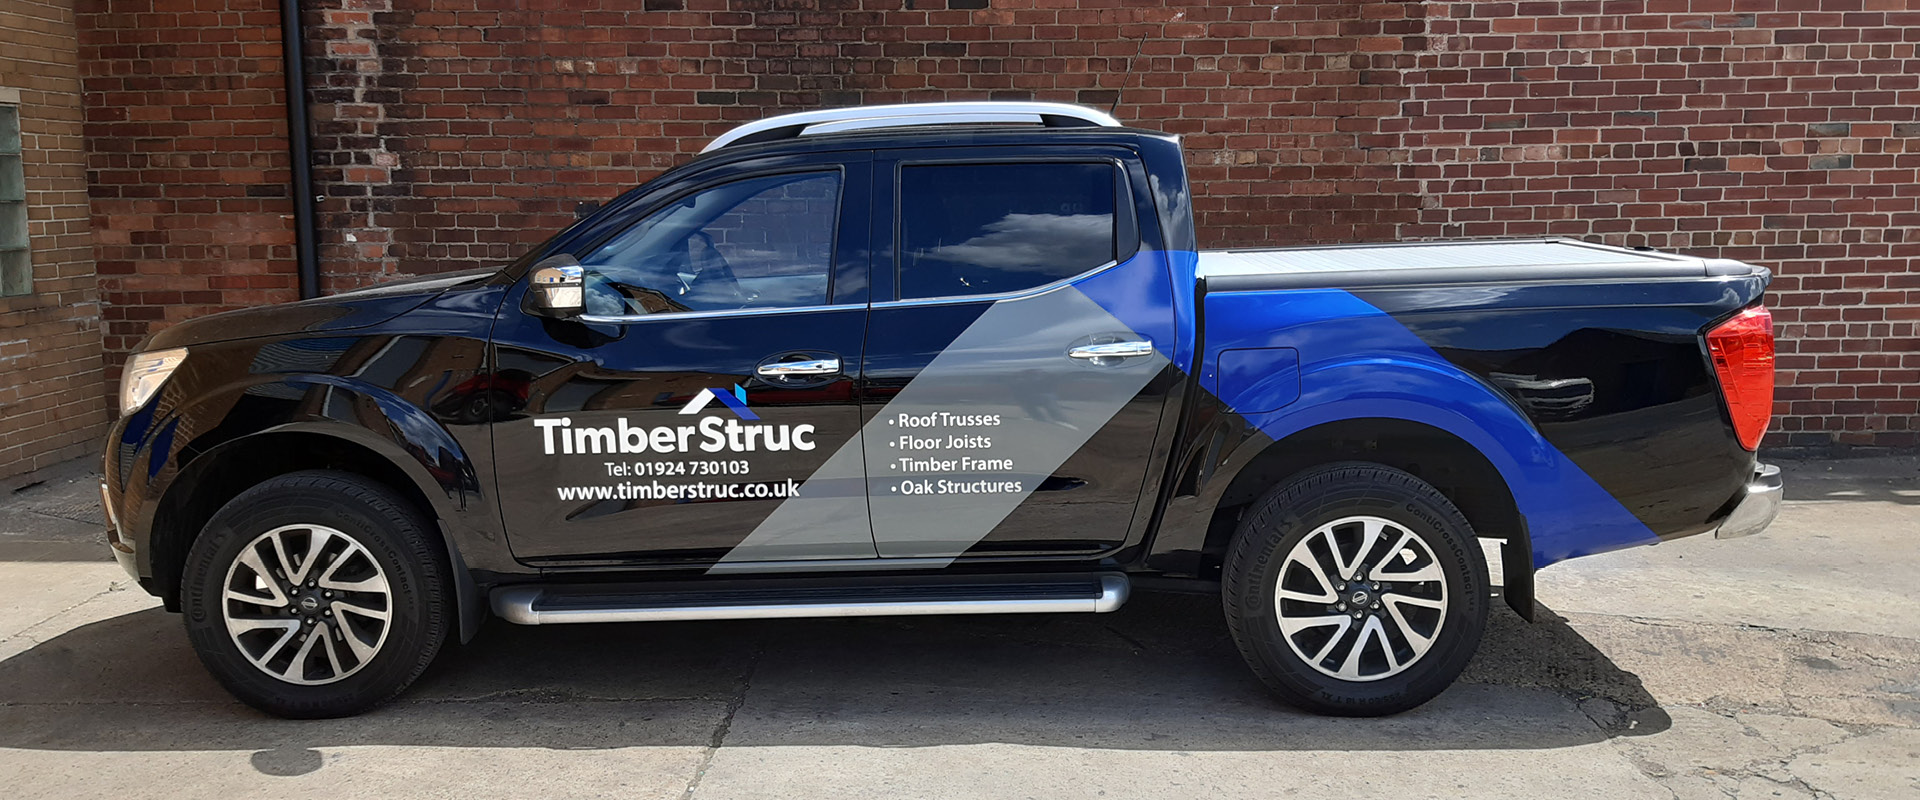 TimberStruc are here….